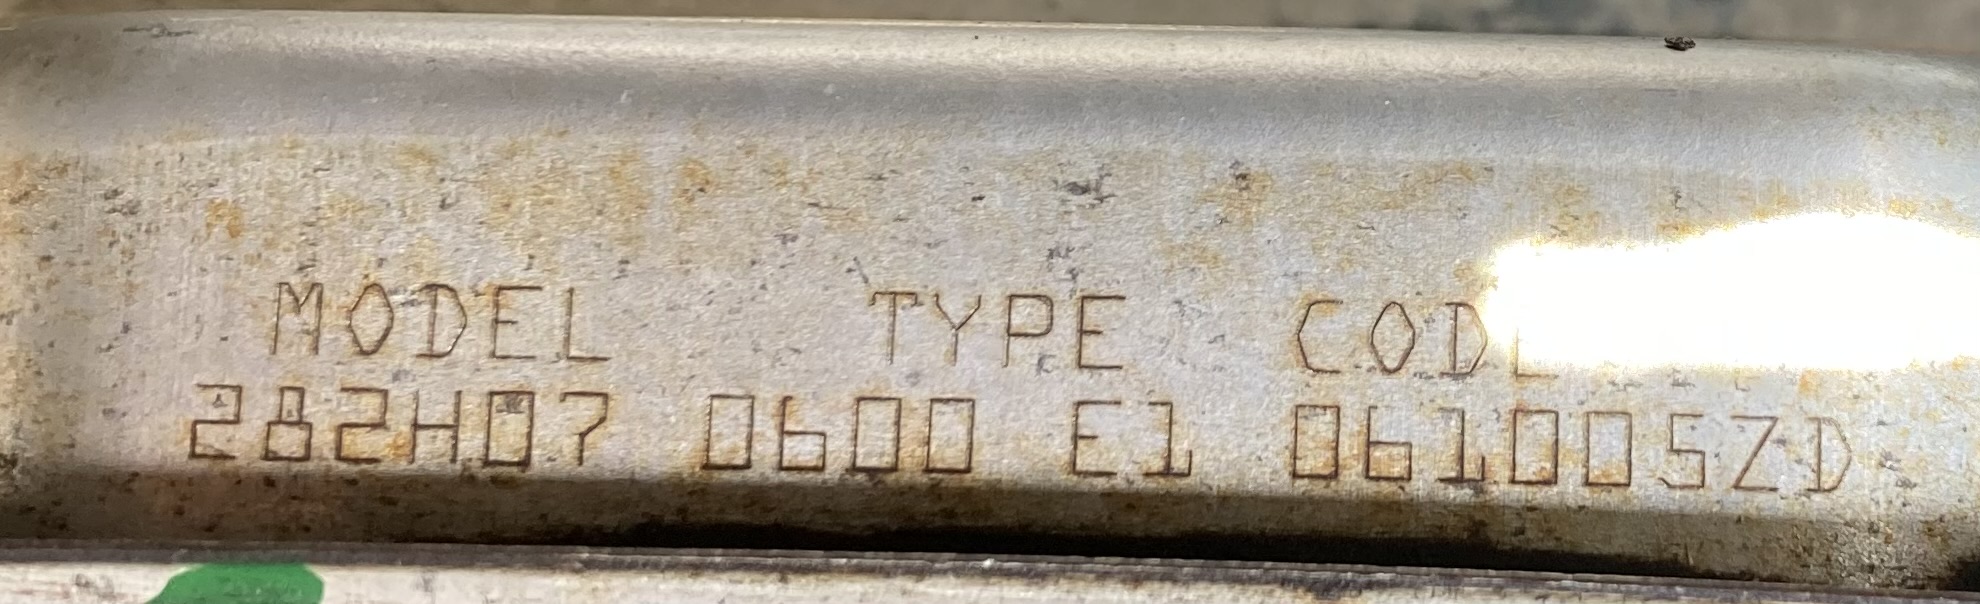 Bolens Garden tractor-numbers on engine valve cover